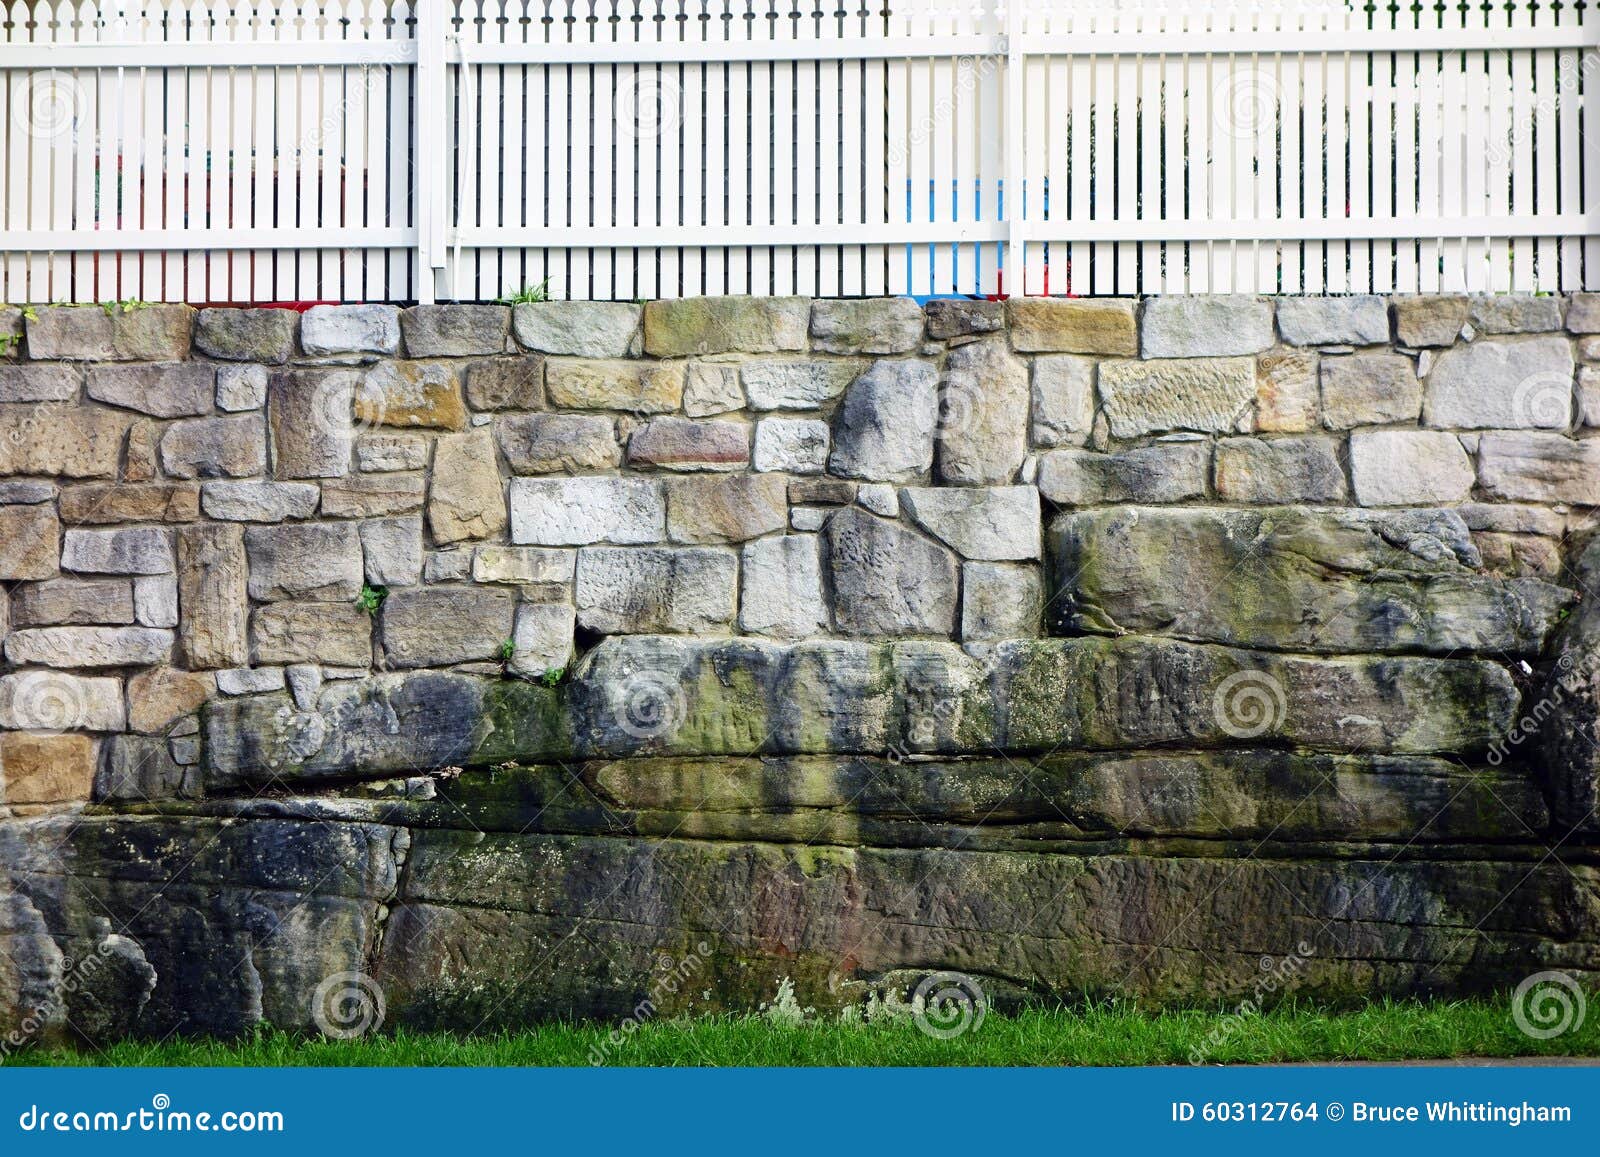 sandstone wall and white picket fence